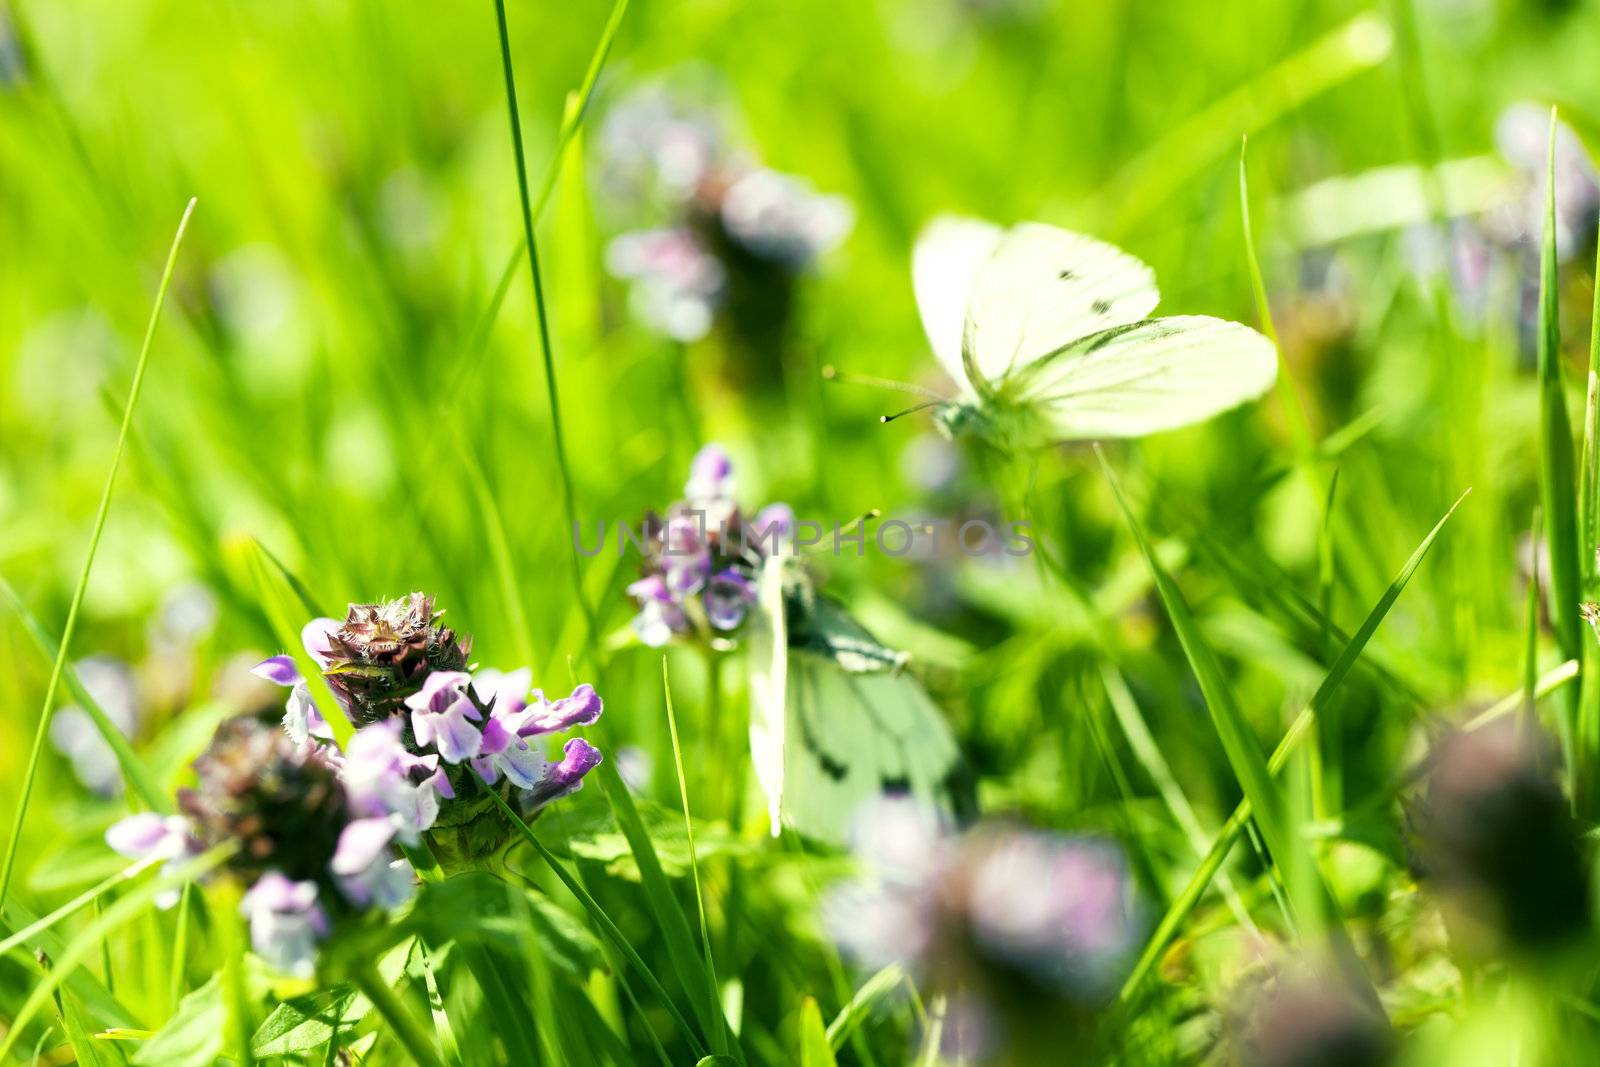 clover blossom in front of mating butterflies by RobStark